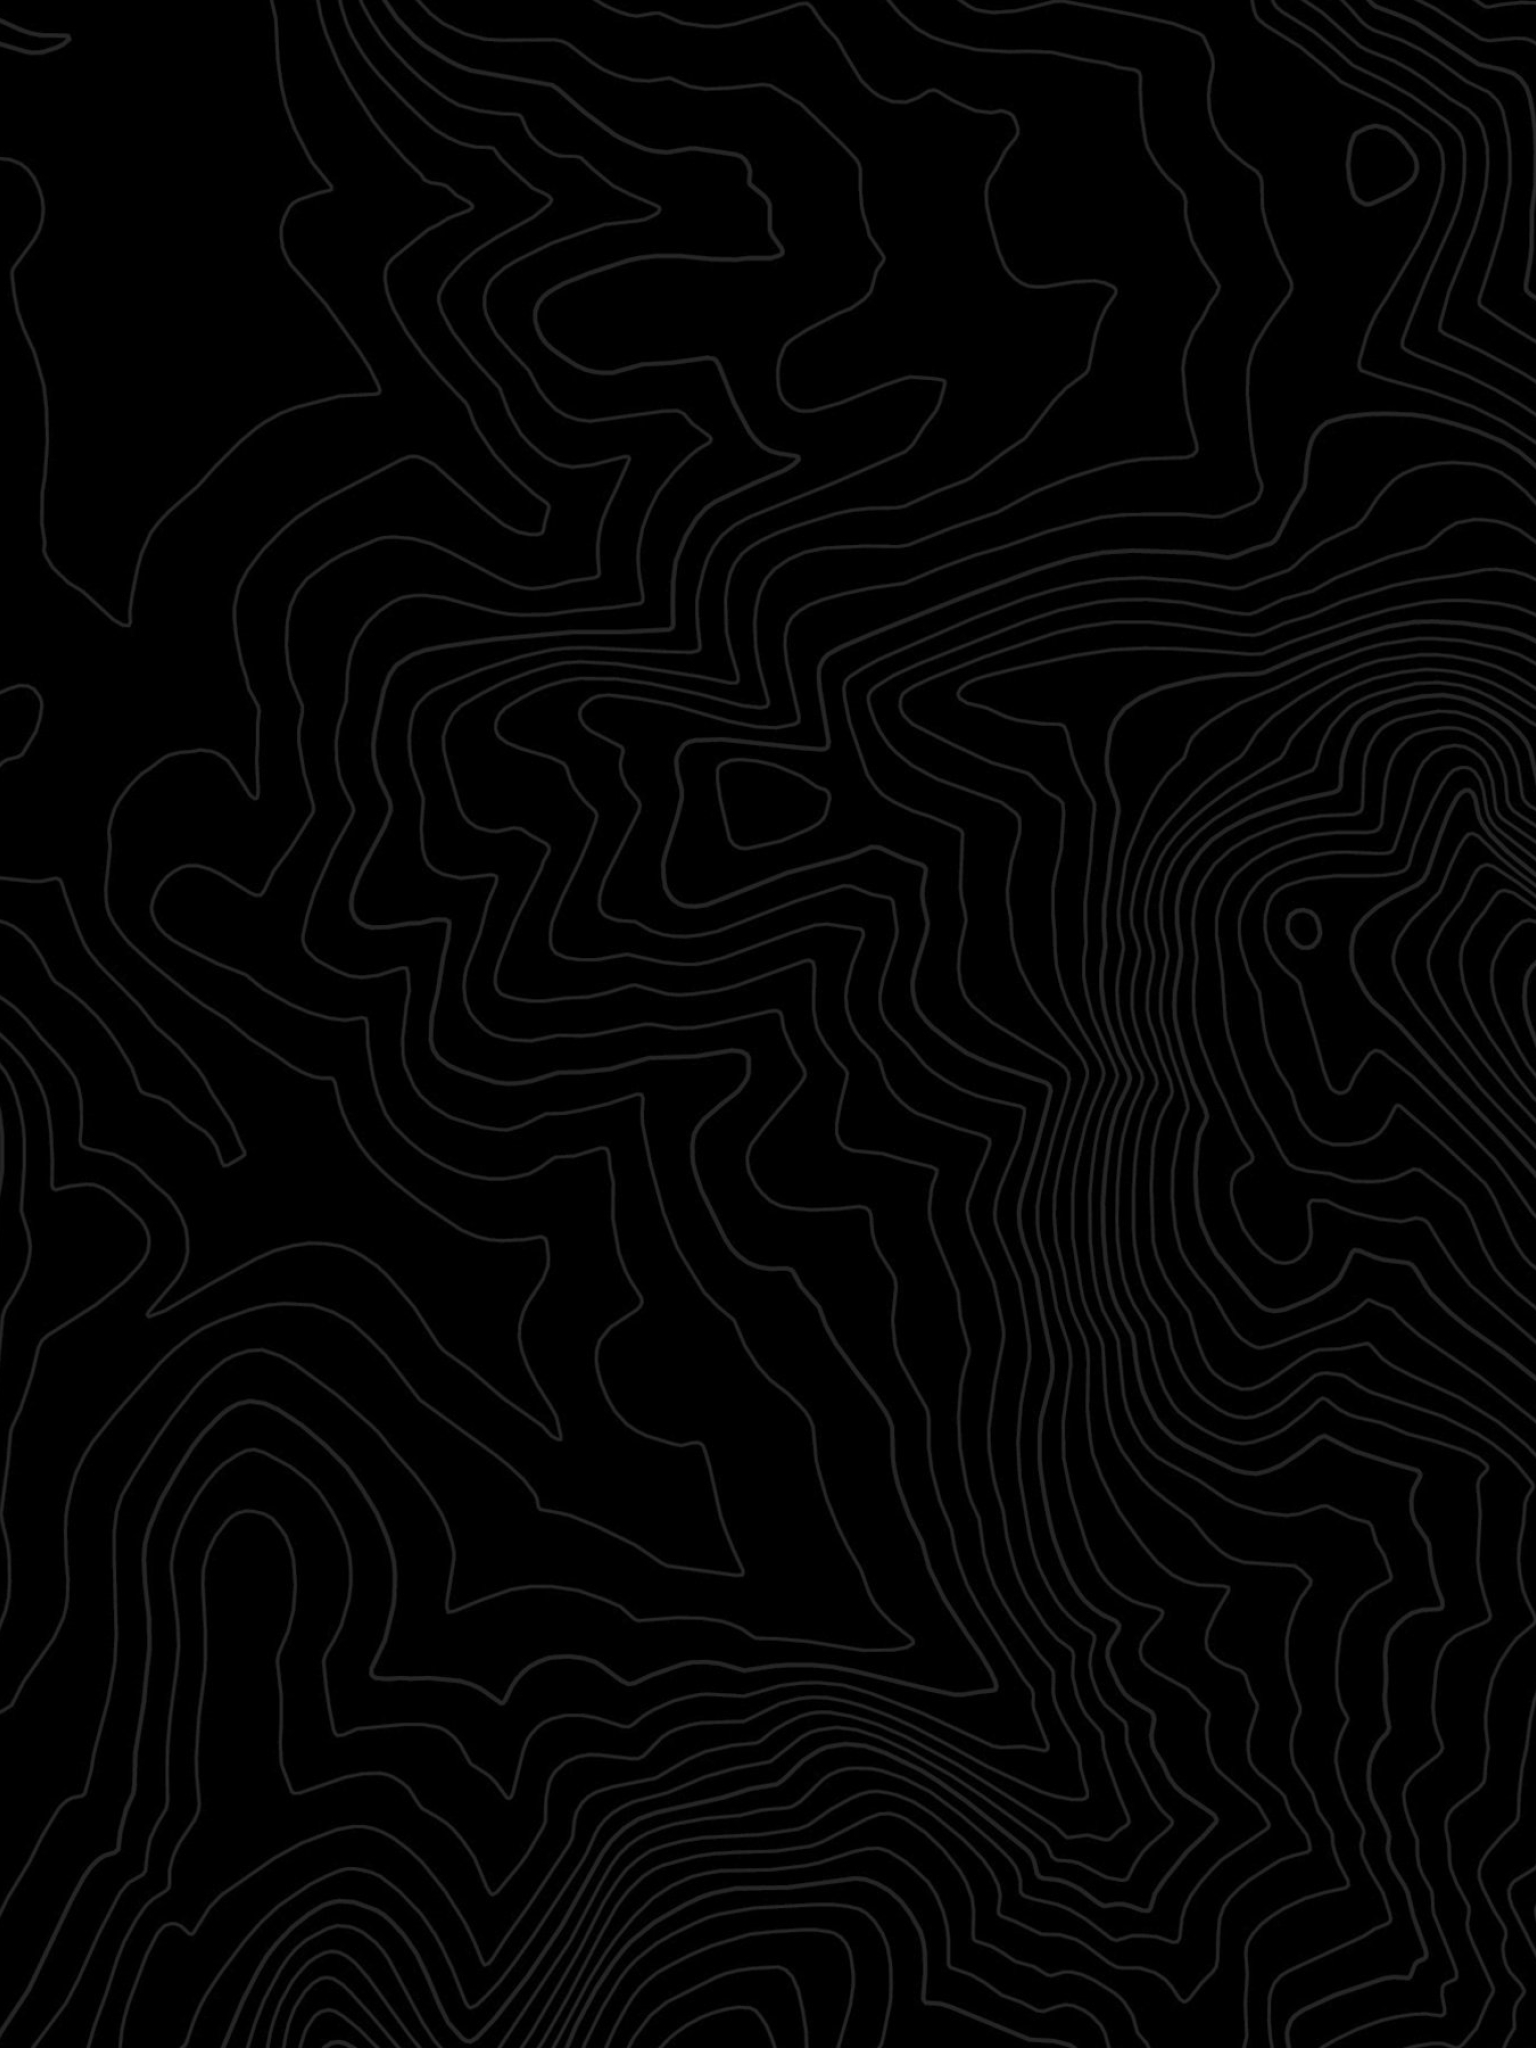 1536x2048 Resolution Topography Abstract Black Texture 1536x2048 Resolution Wallpaper